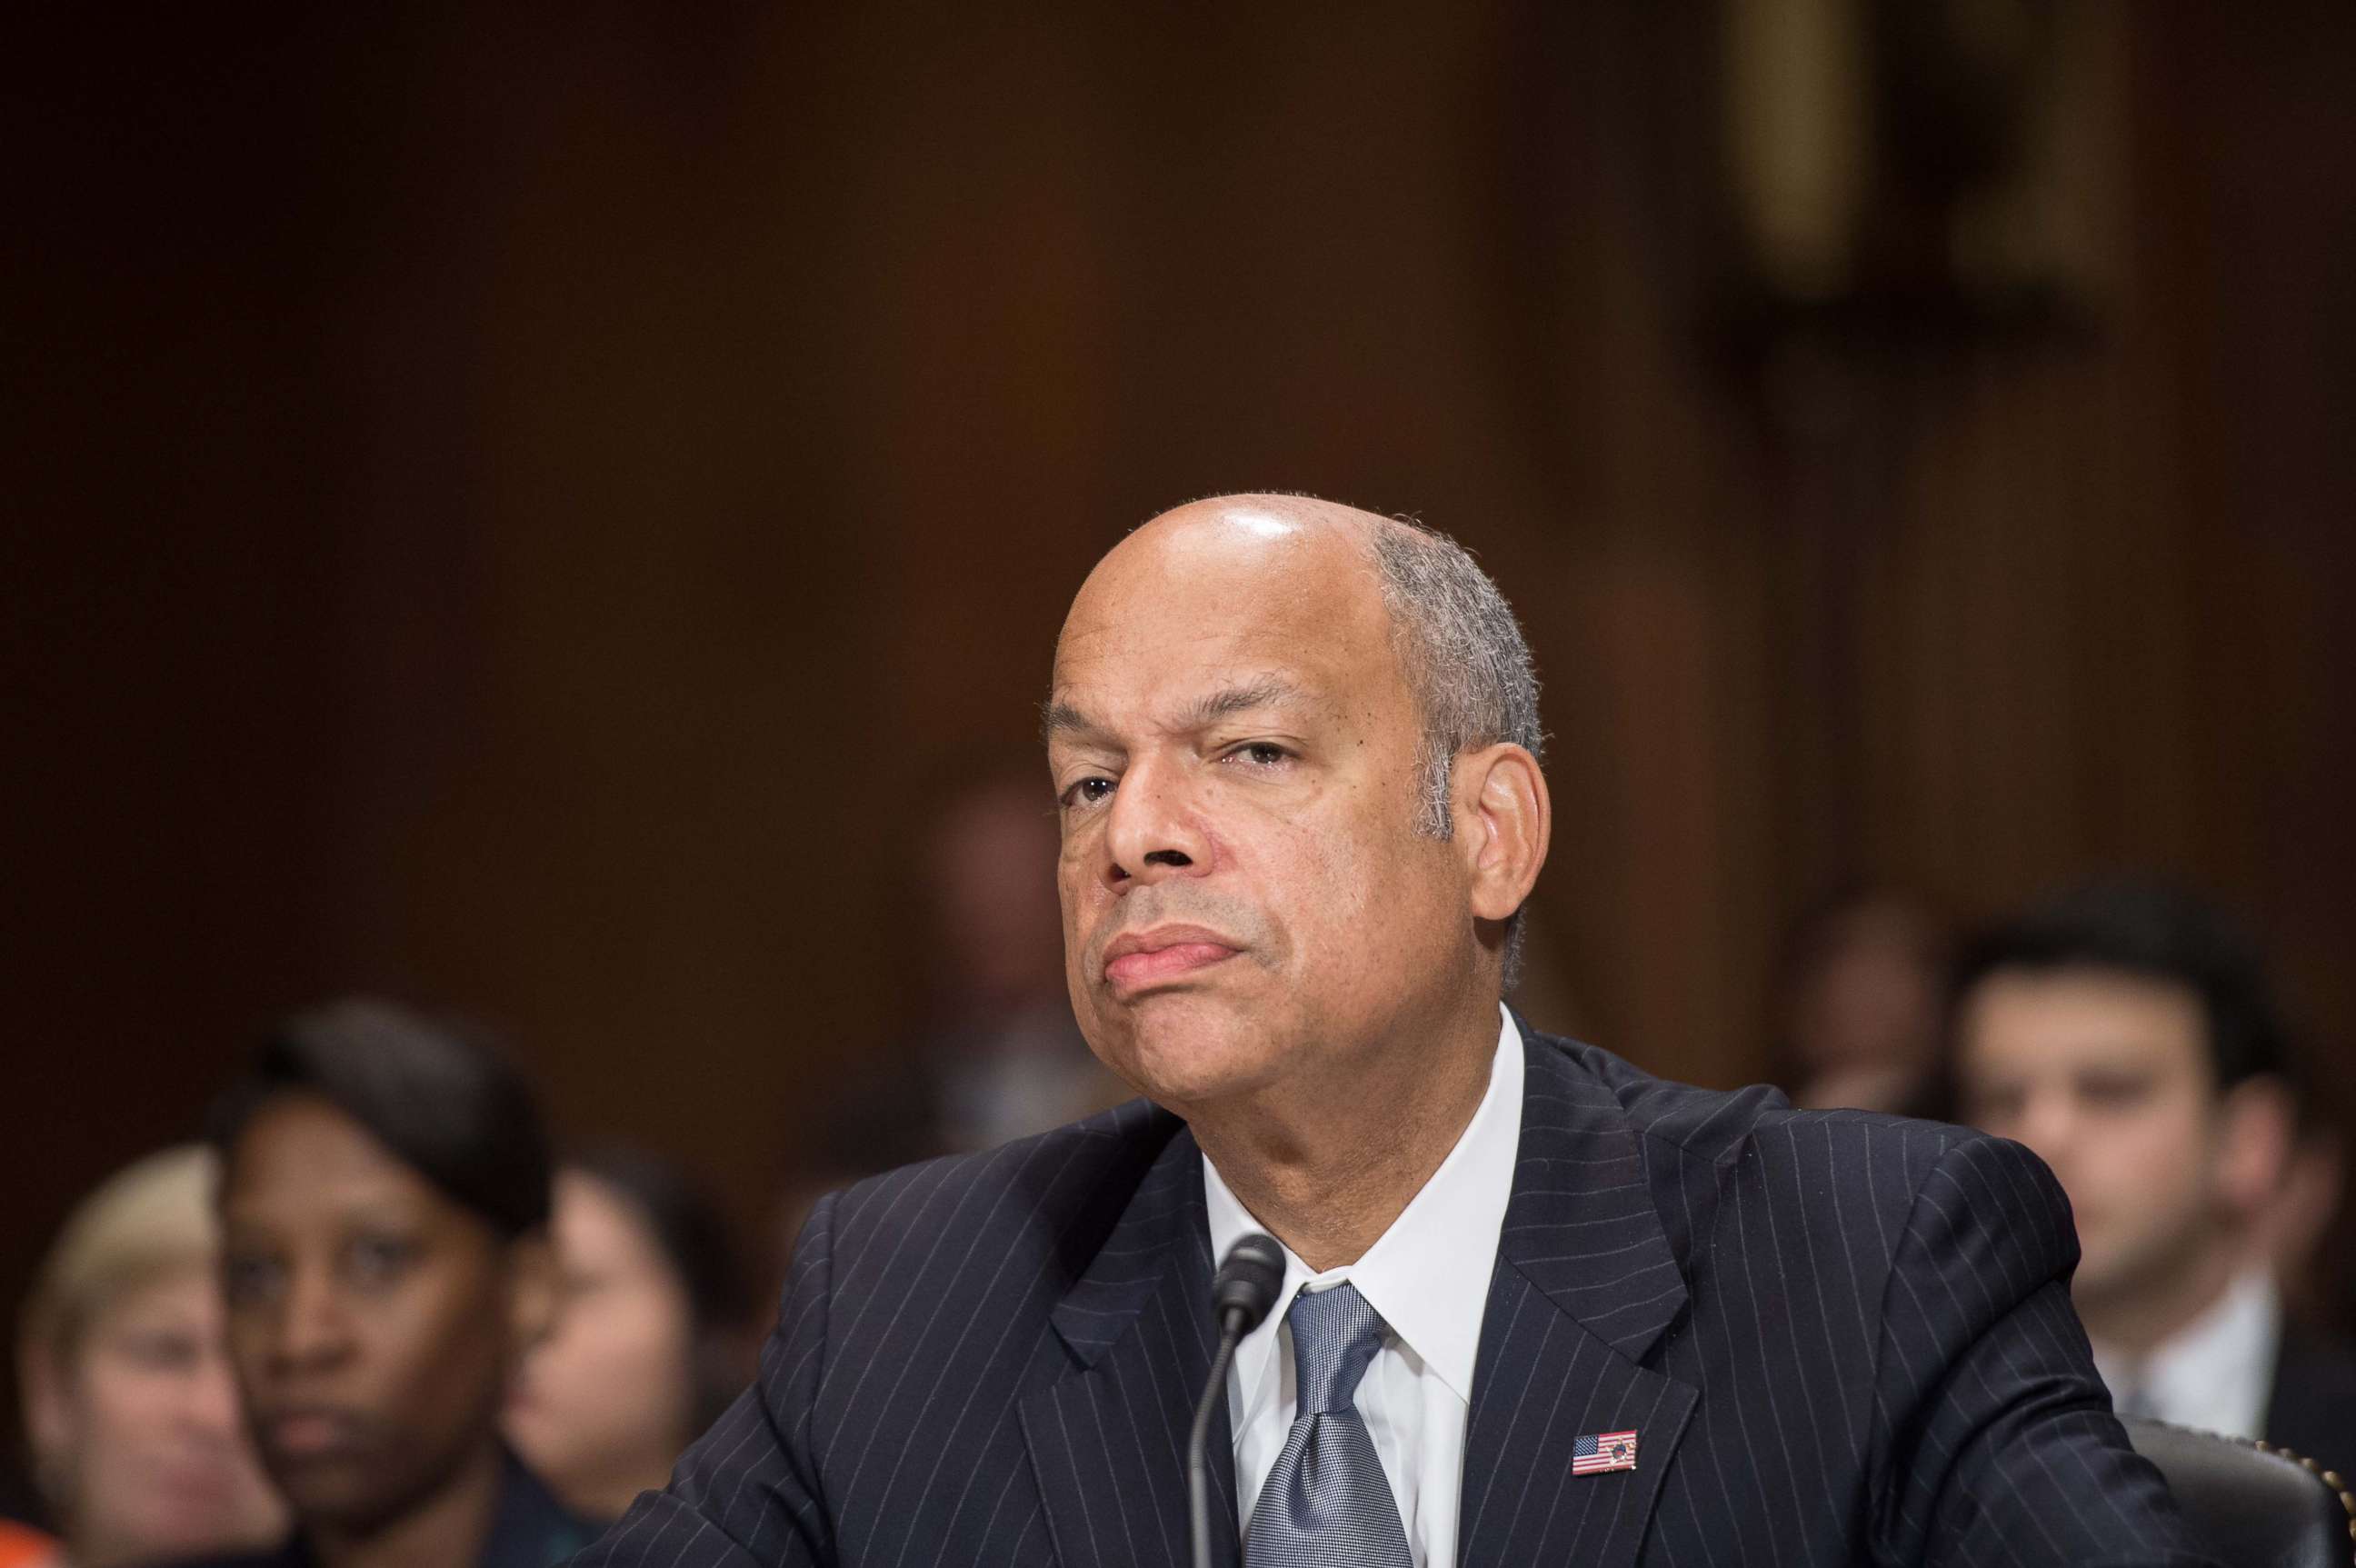 PHOTO: Homeland Security Secretary Jeh Johnson testifies at a Senate Judiciary Committee hearing on "Oversight of the Department of Homeland Security" on Capitol Hill in Washington, D.C., June 30, 2016.